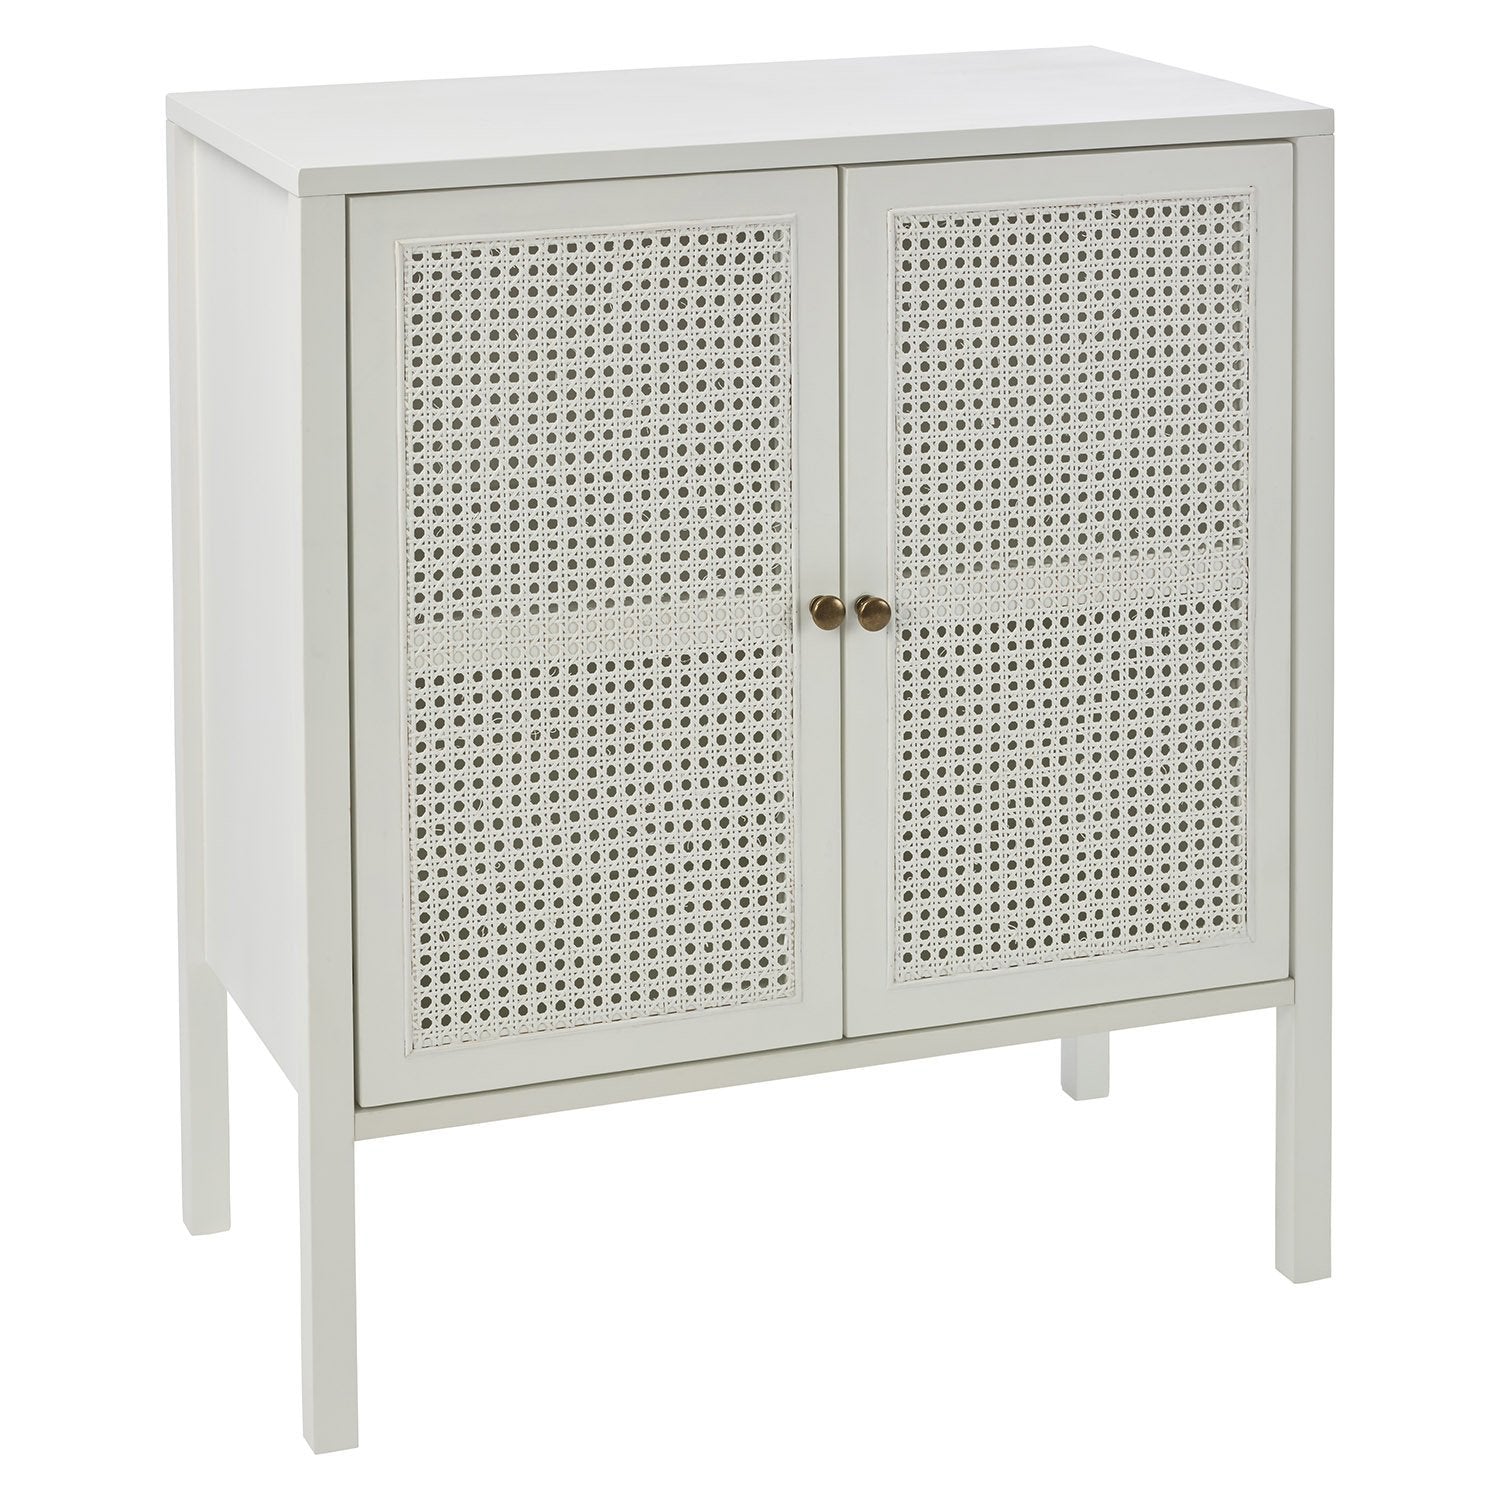 Charlie small sideboard - cane front - white - Laura James